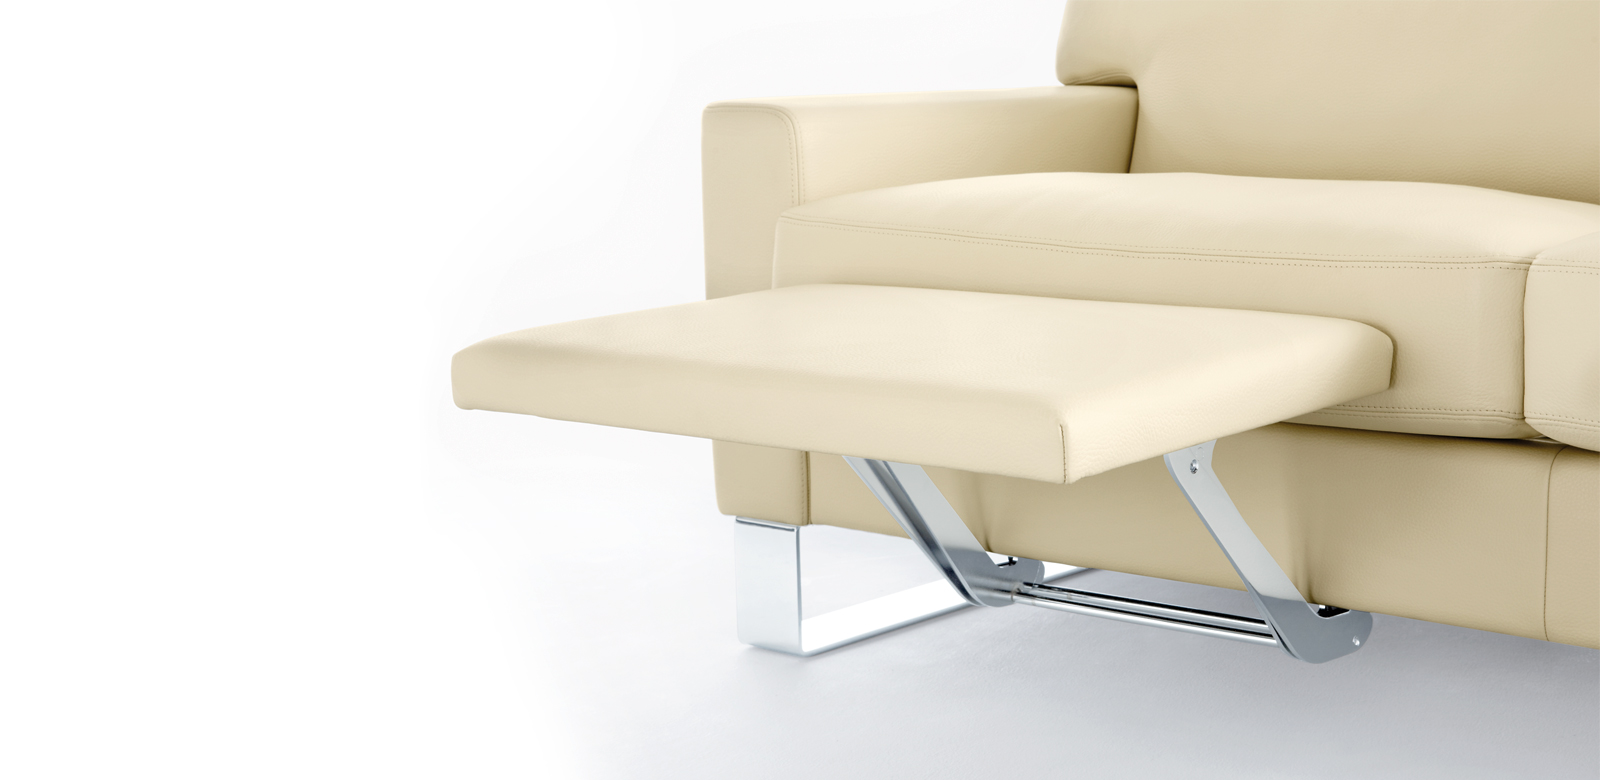 CL400 with beige leather and silver/chrome runners, with focus on the fold-out footrest.